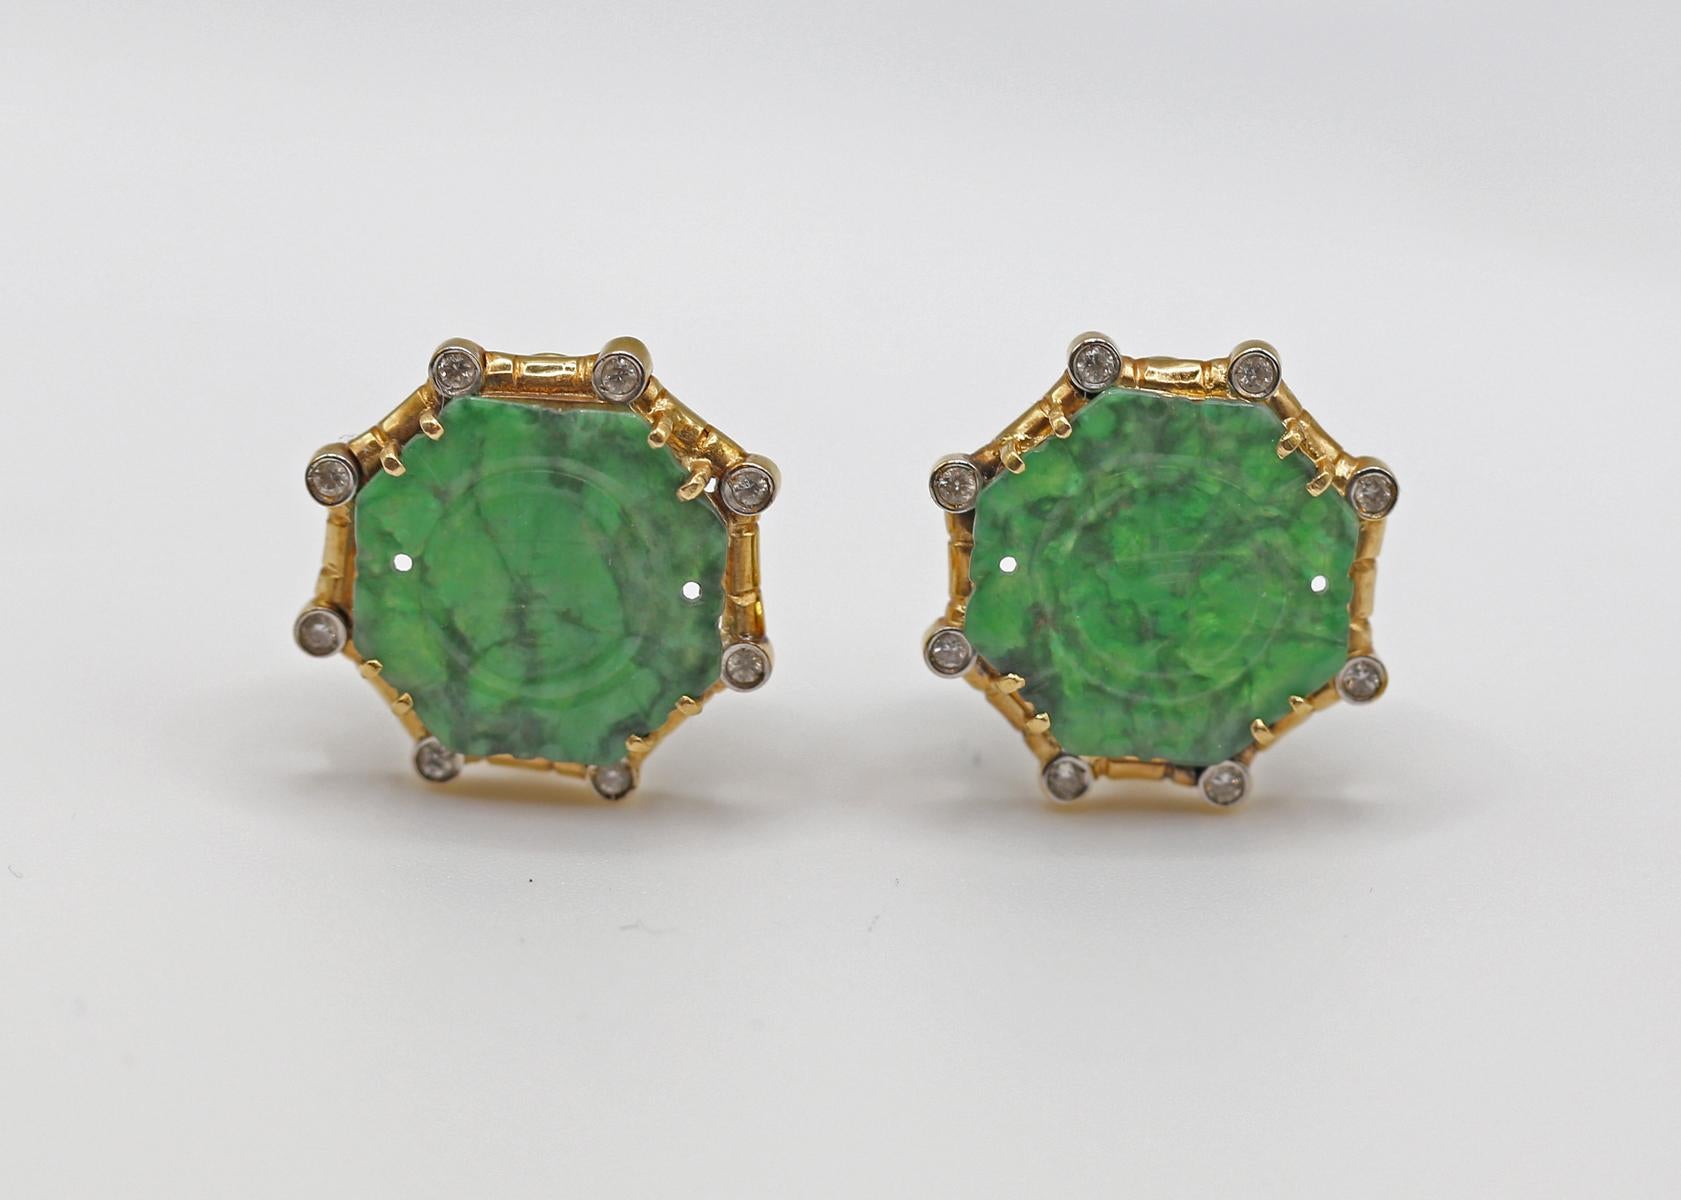 Carved Jade And Diamond Earclips 18K Gold. Created around 1970.
Carved jade and round brilliant cut diamonds, posts with clipbacks. 18 Karats bicolor gold. Fine Jade octagon designs have finely carved Chinese symbols of Good Fortune. 
Jade is set in